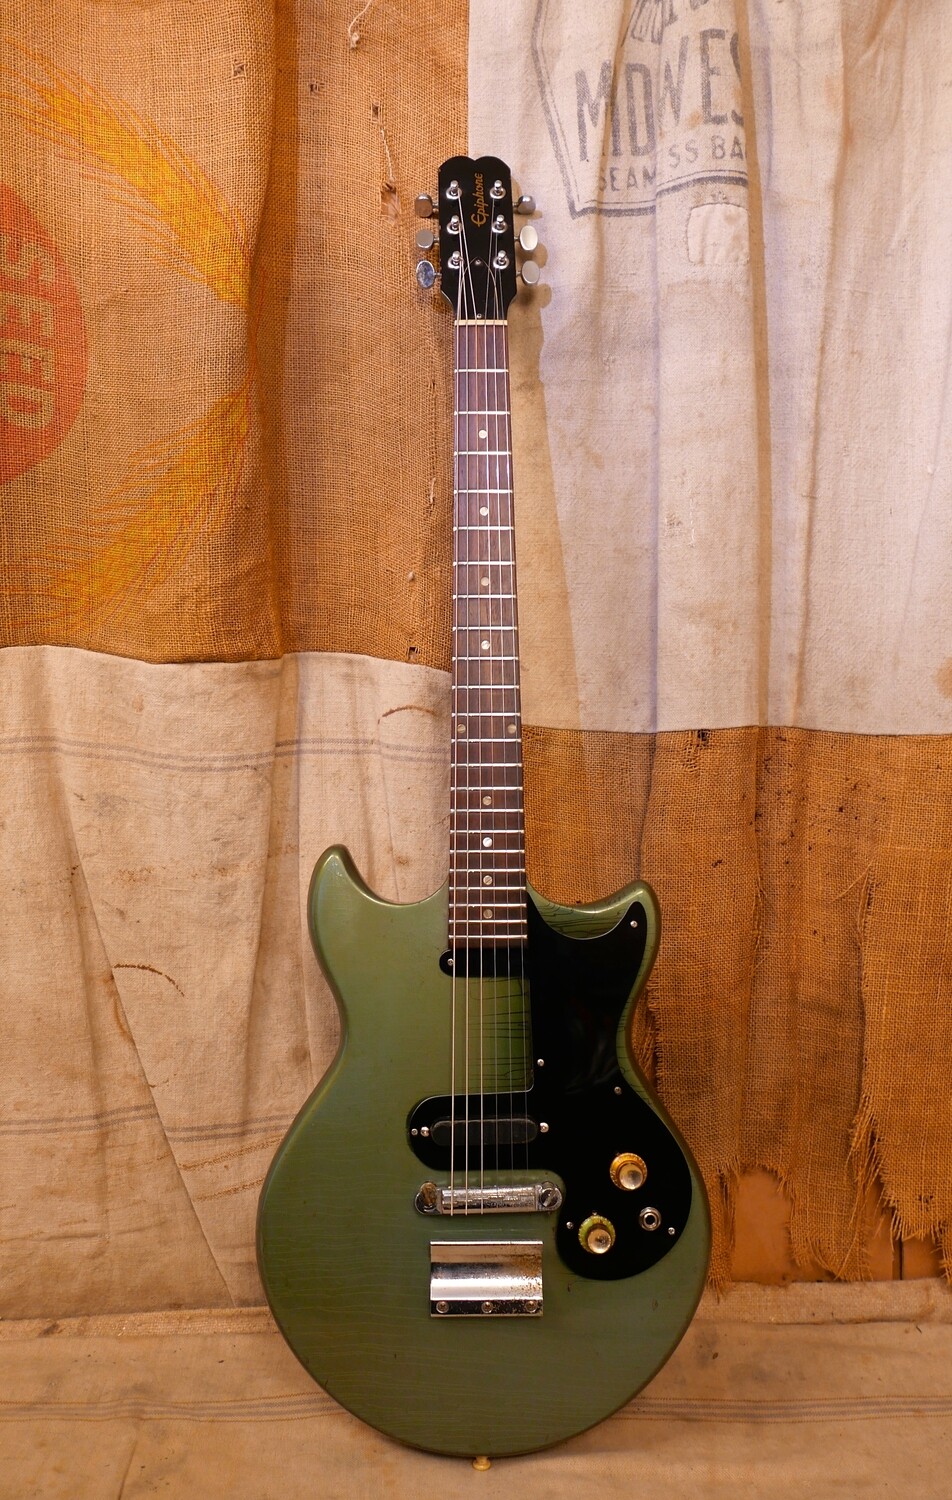 1965 Epiphone Olympic Pacific Blue-Green